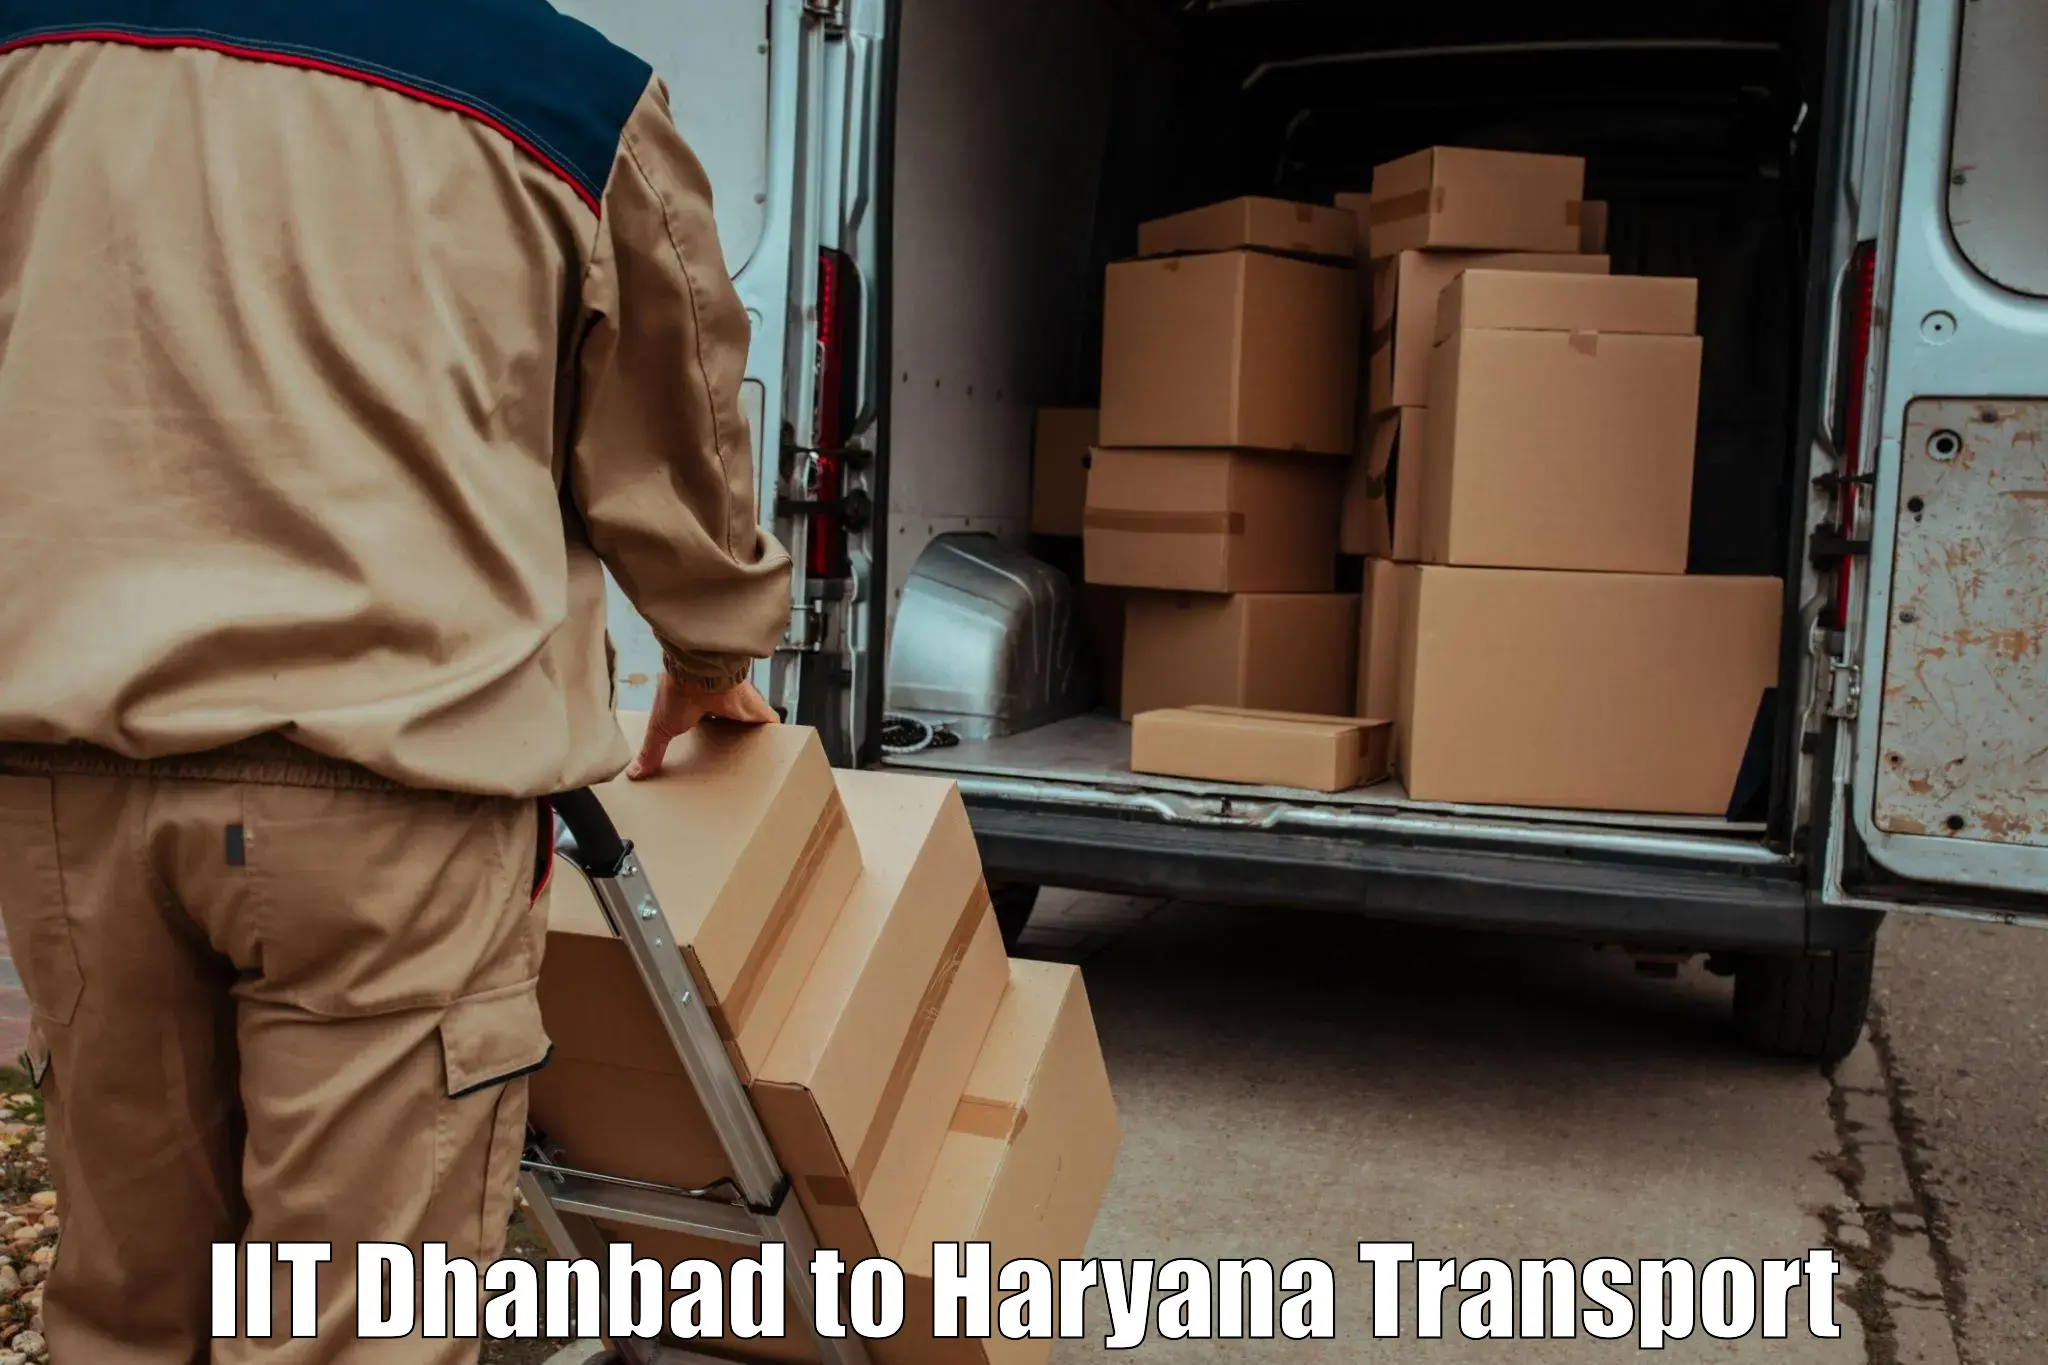 Air freight transport services in IIT Dhanbad to Shahabad Markanda